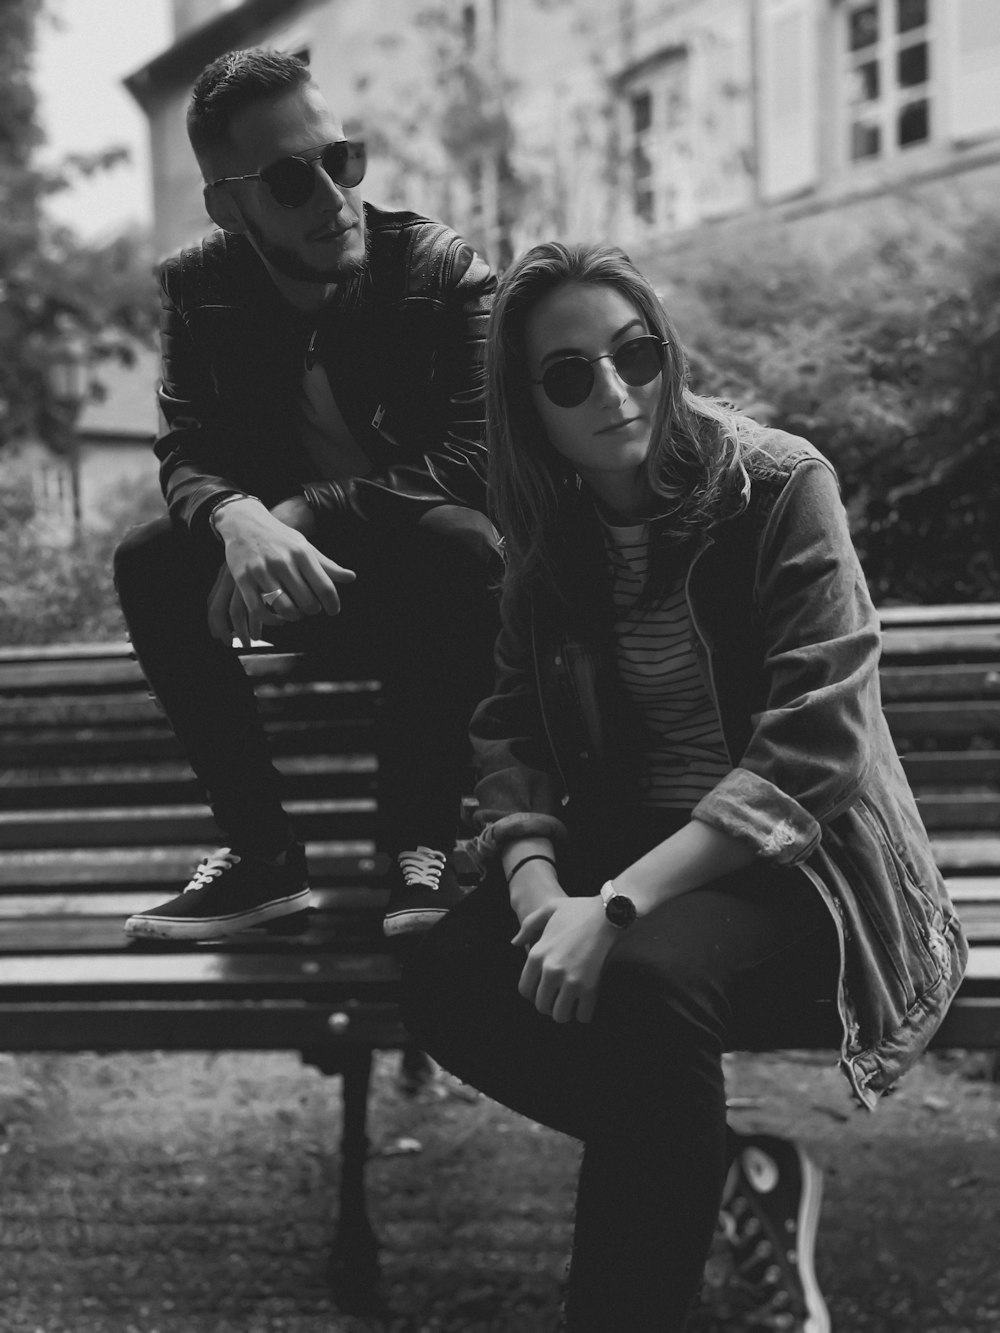 grayscale photo of a man and a woman on a bench